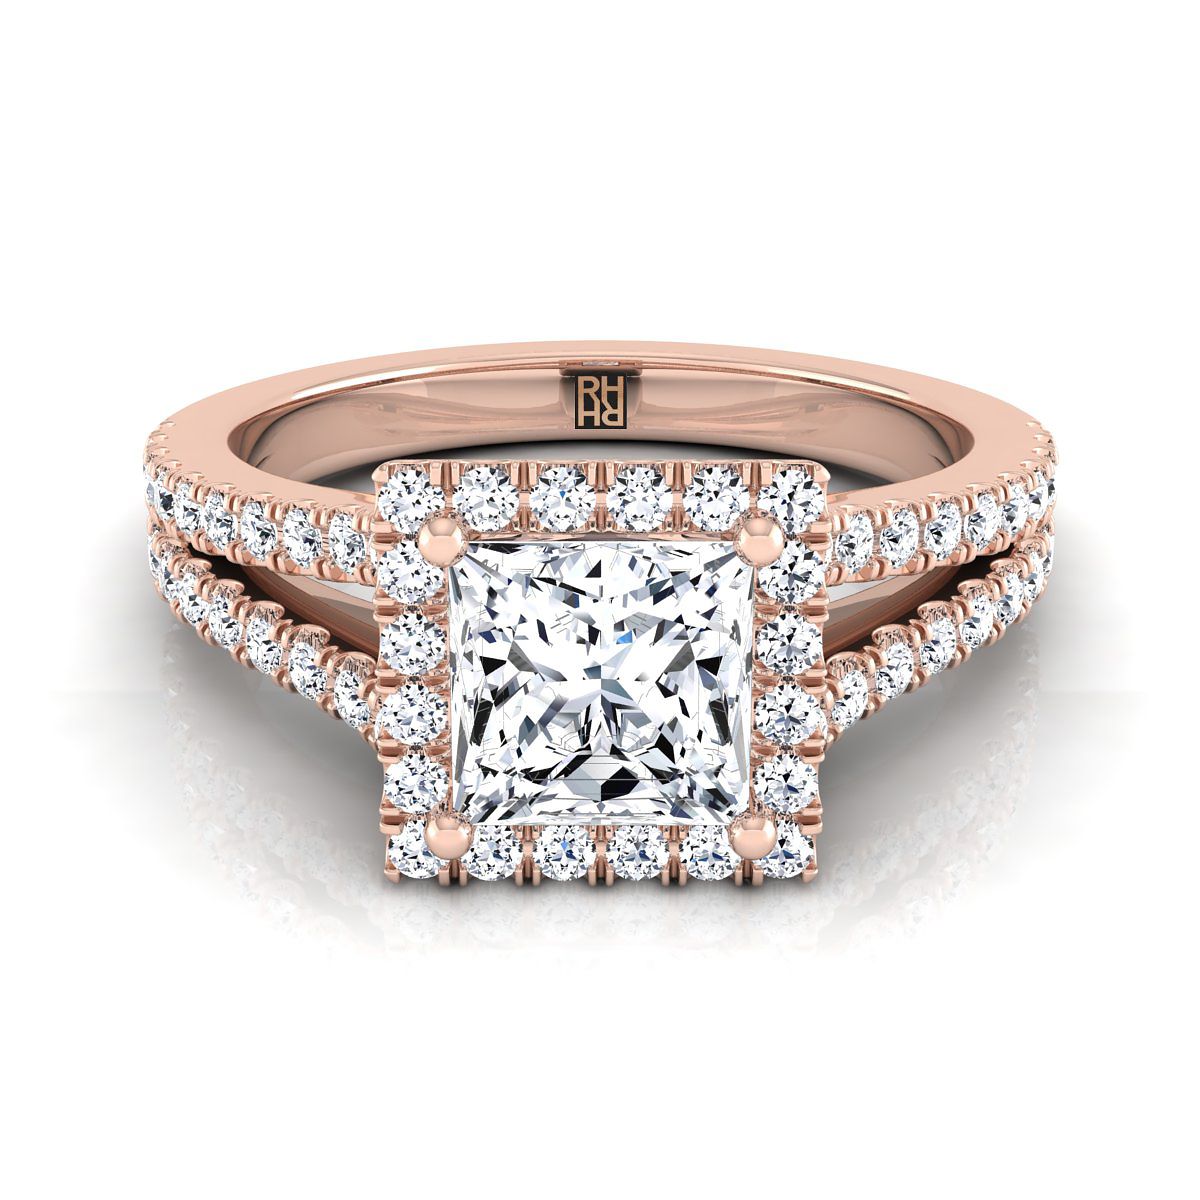 14K Rose Gold Princess Cut Diamond Halo Center with French Pave Split Shank Engagement Ring -3/8ctw